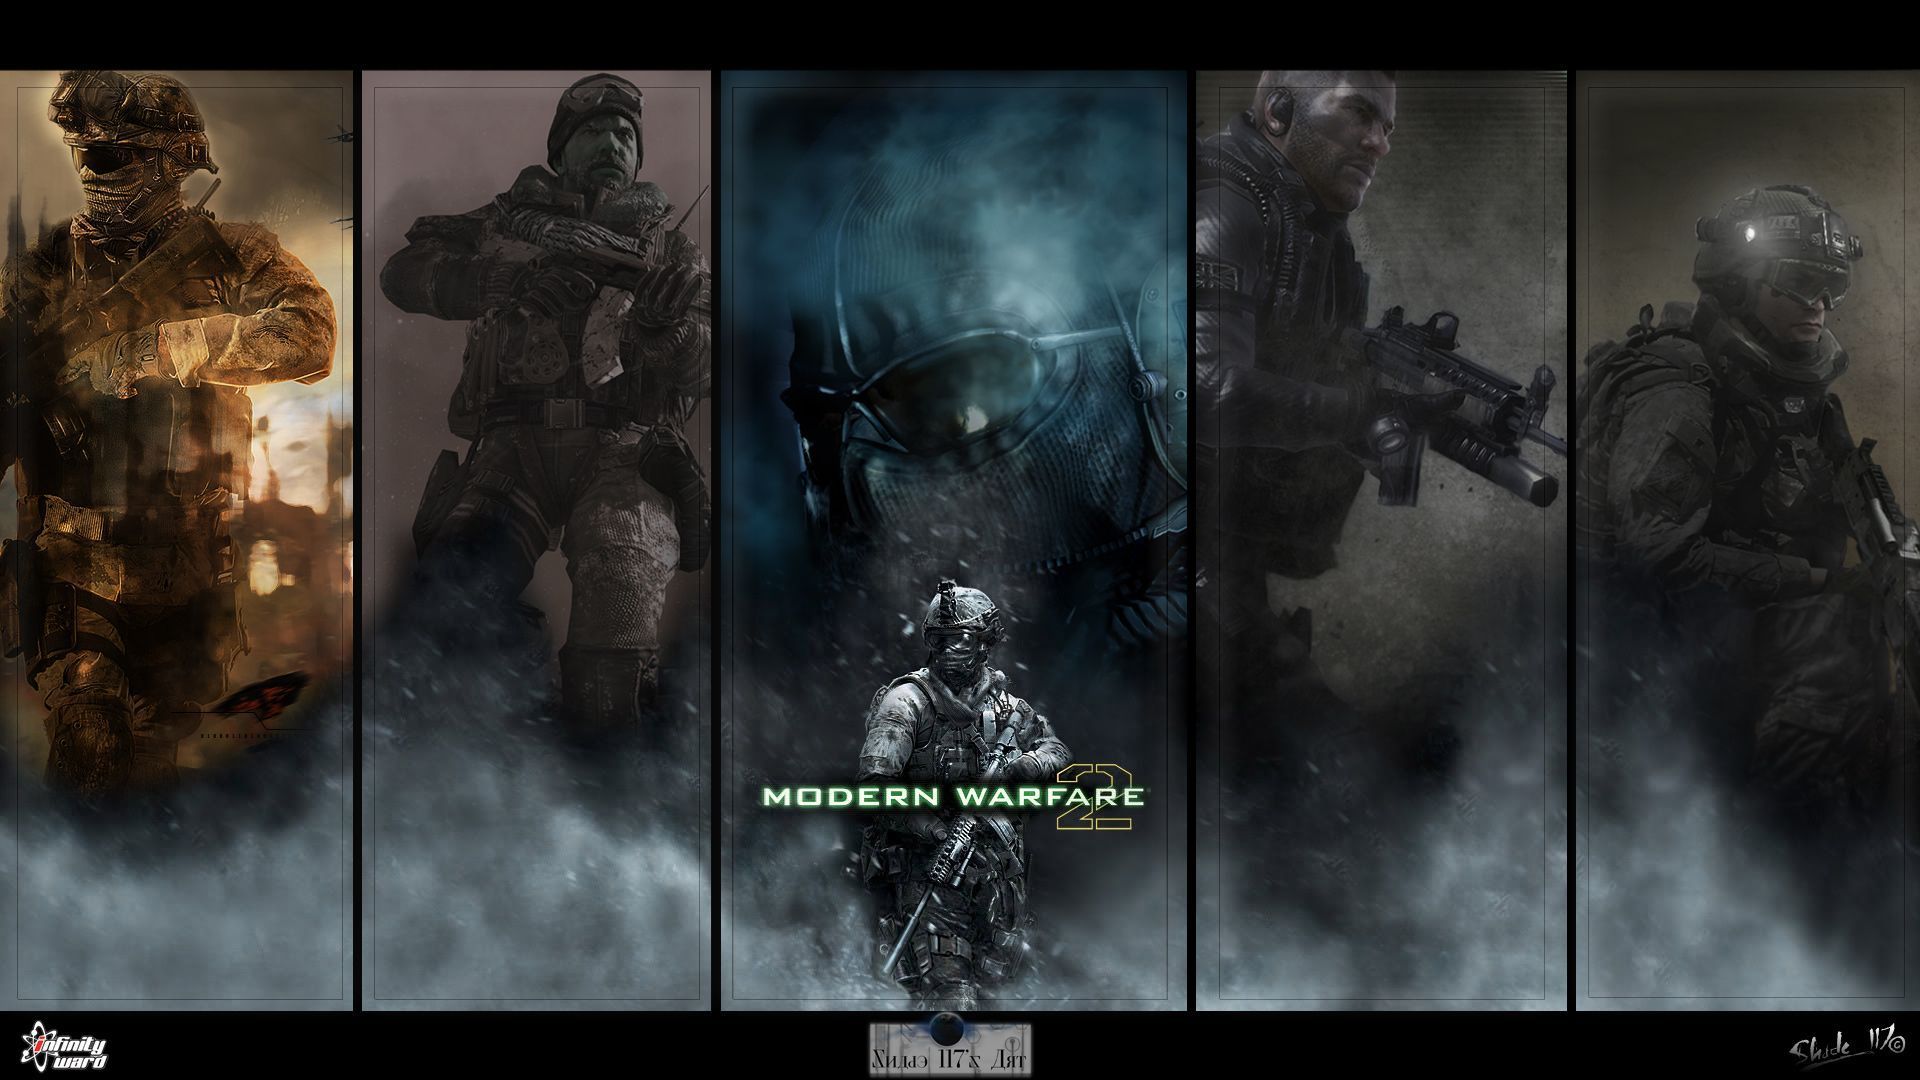 Call of Duty MW2 Wallpaper Free Call of Duty MW2 Background